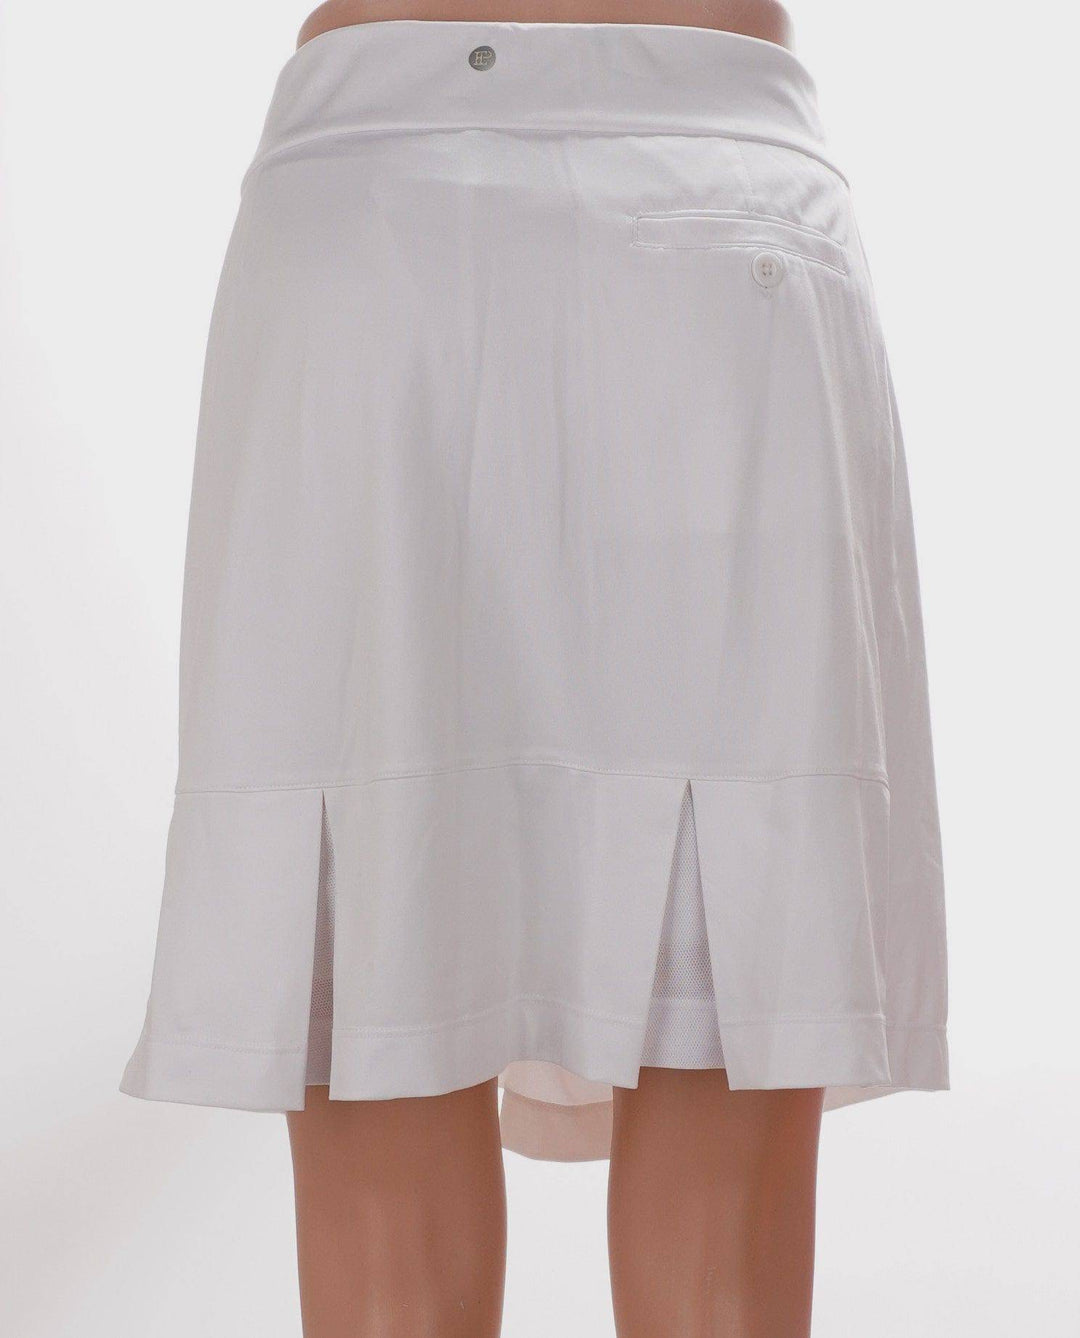 Ep X-Large / White / Consigned Ep Pull On Golf Skort - White - Size X-Large